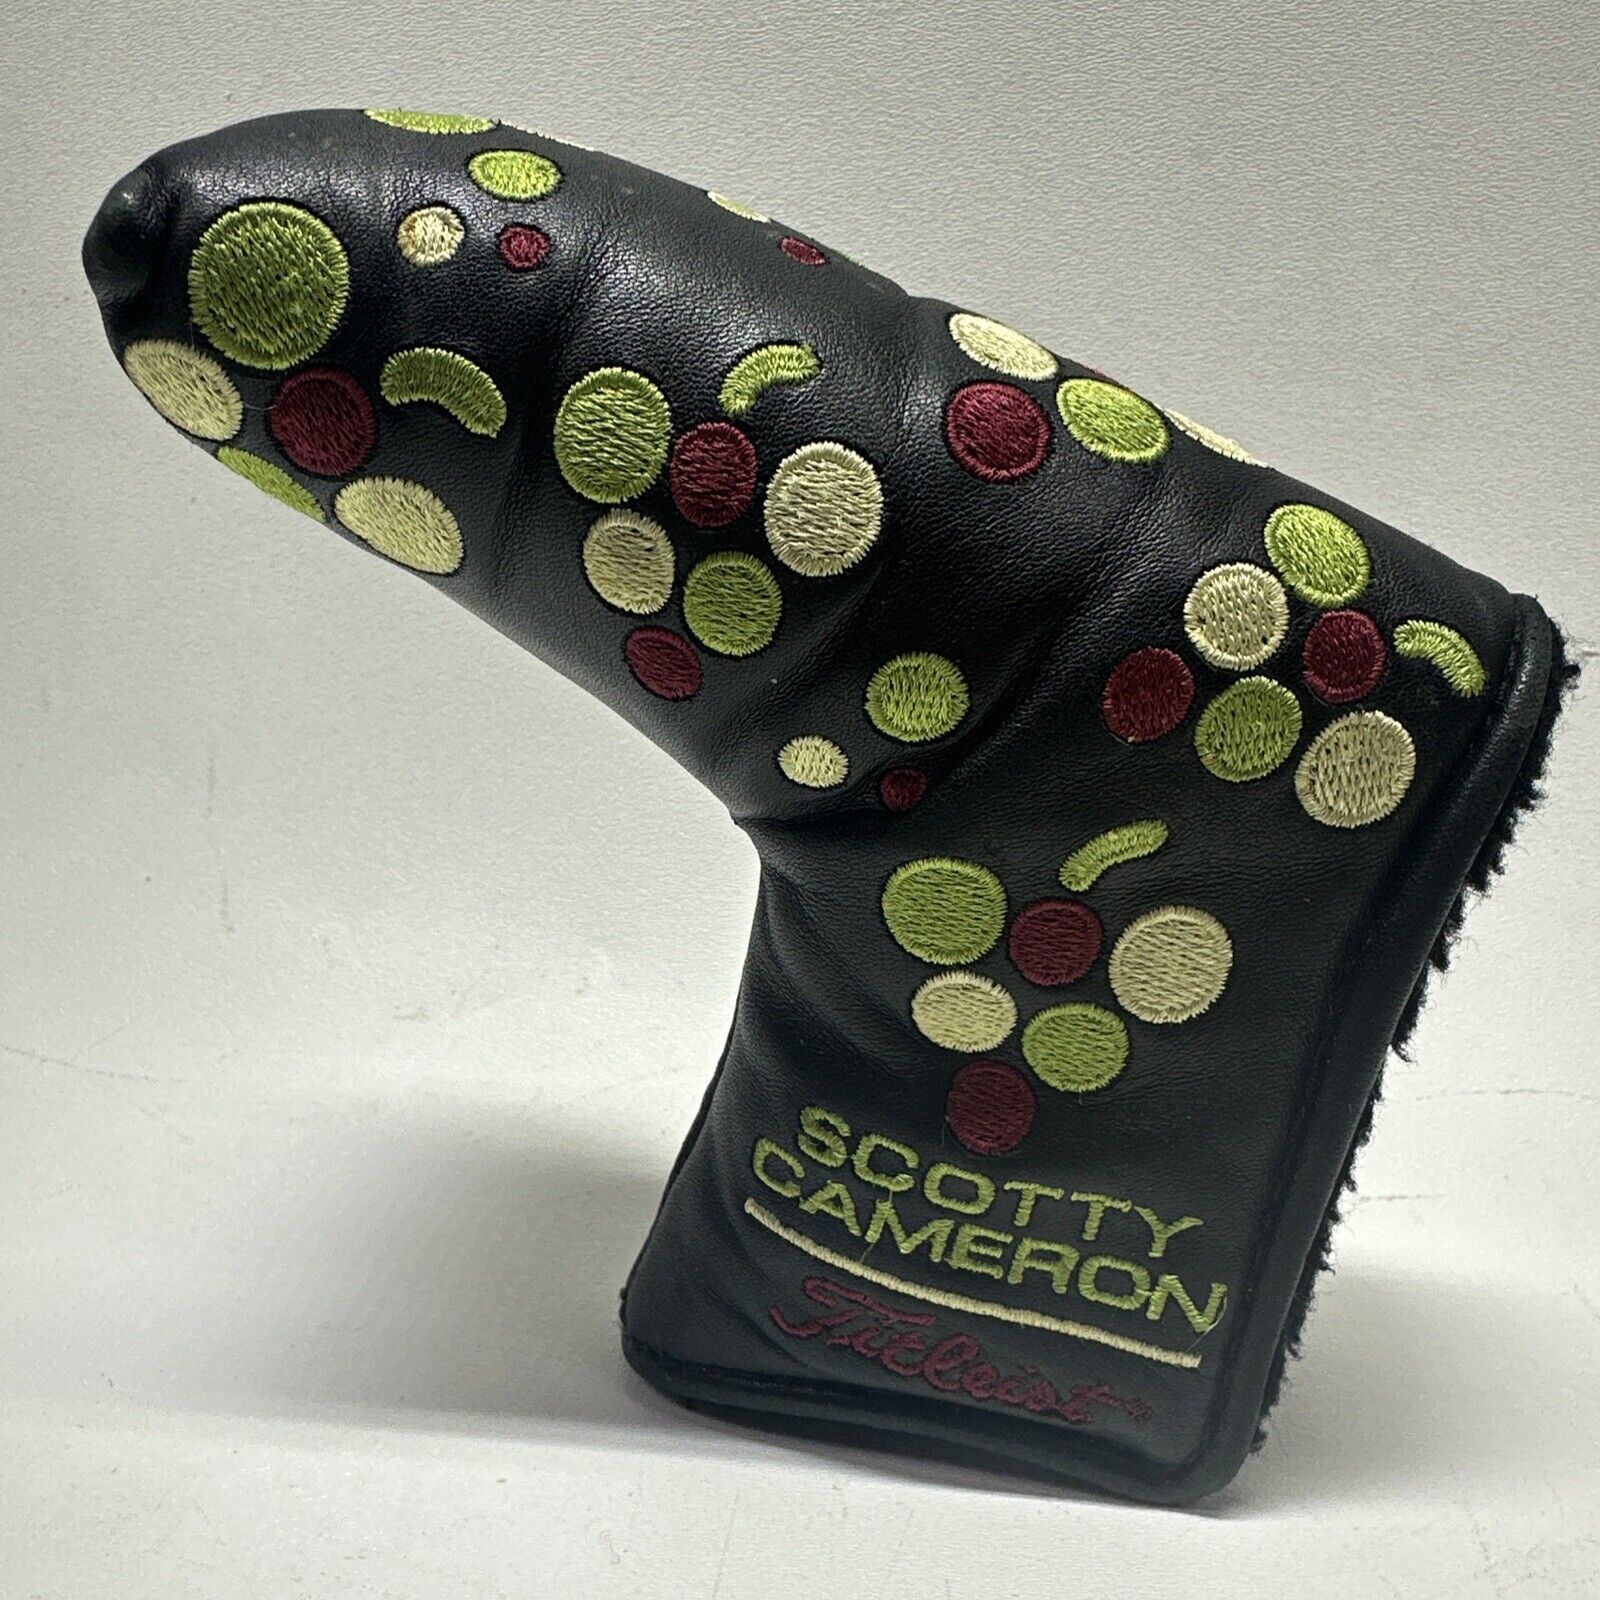 2009 Scotty Cameron Titleist Limited Edition California Napa Putter Cover PGA - $329.99